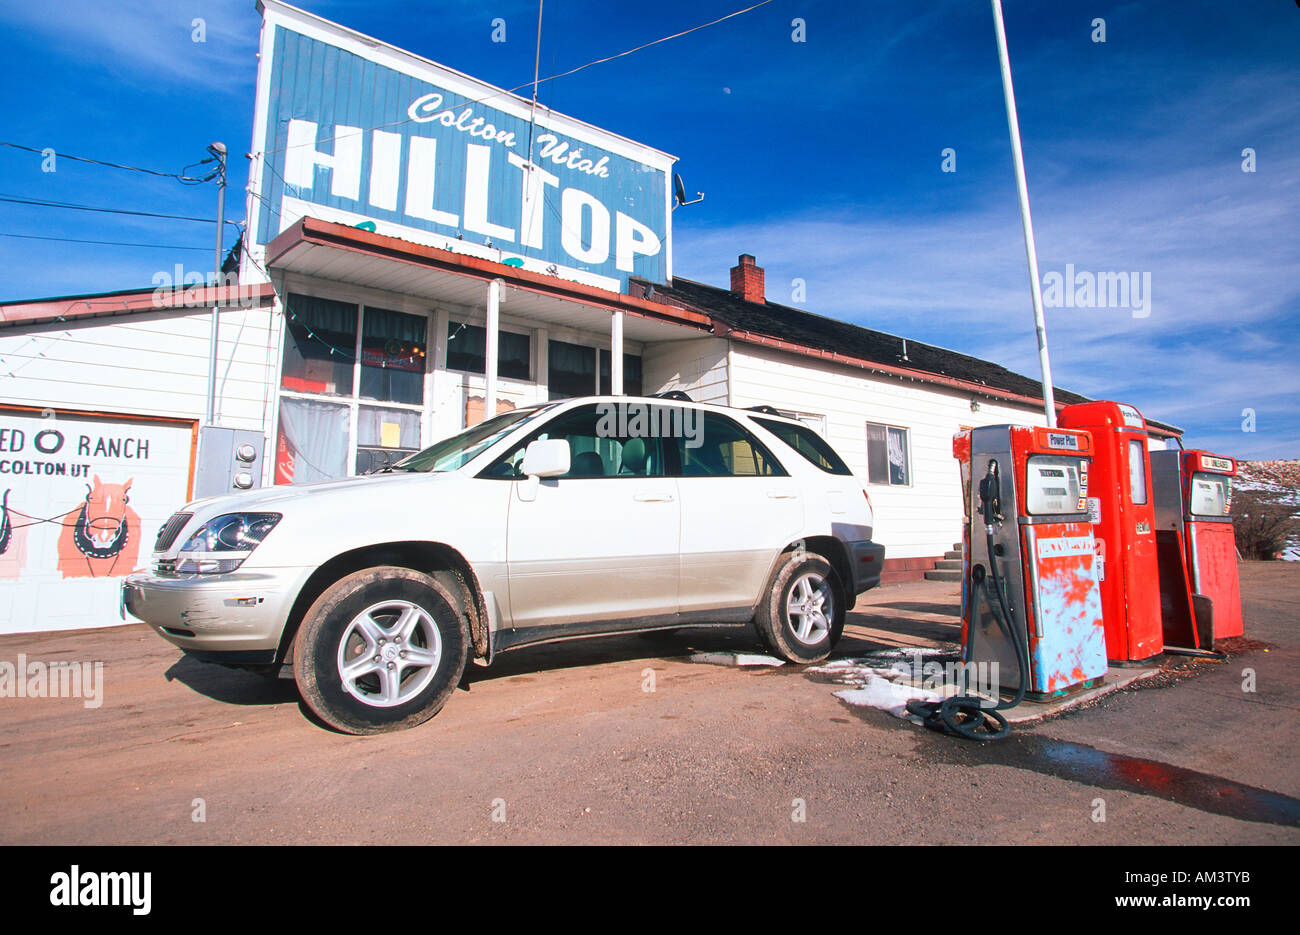 Joe Sohm s RX300 Lexus in front of old gas station in Western US Stock Photo